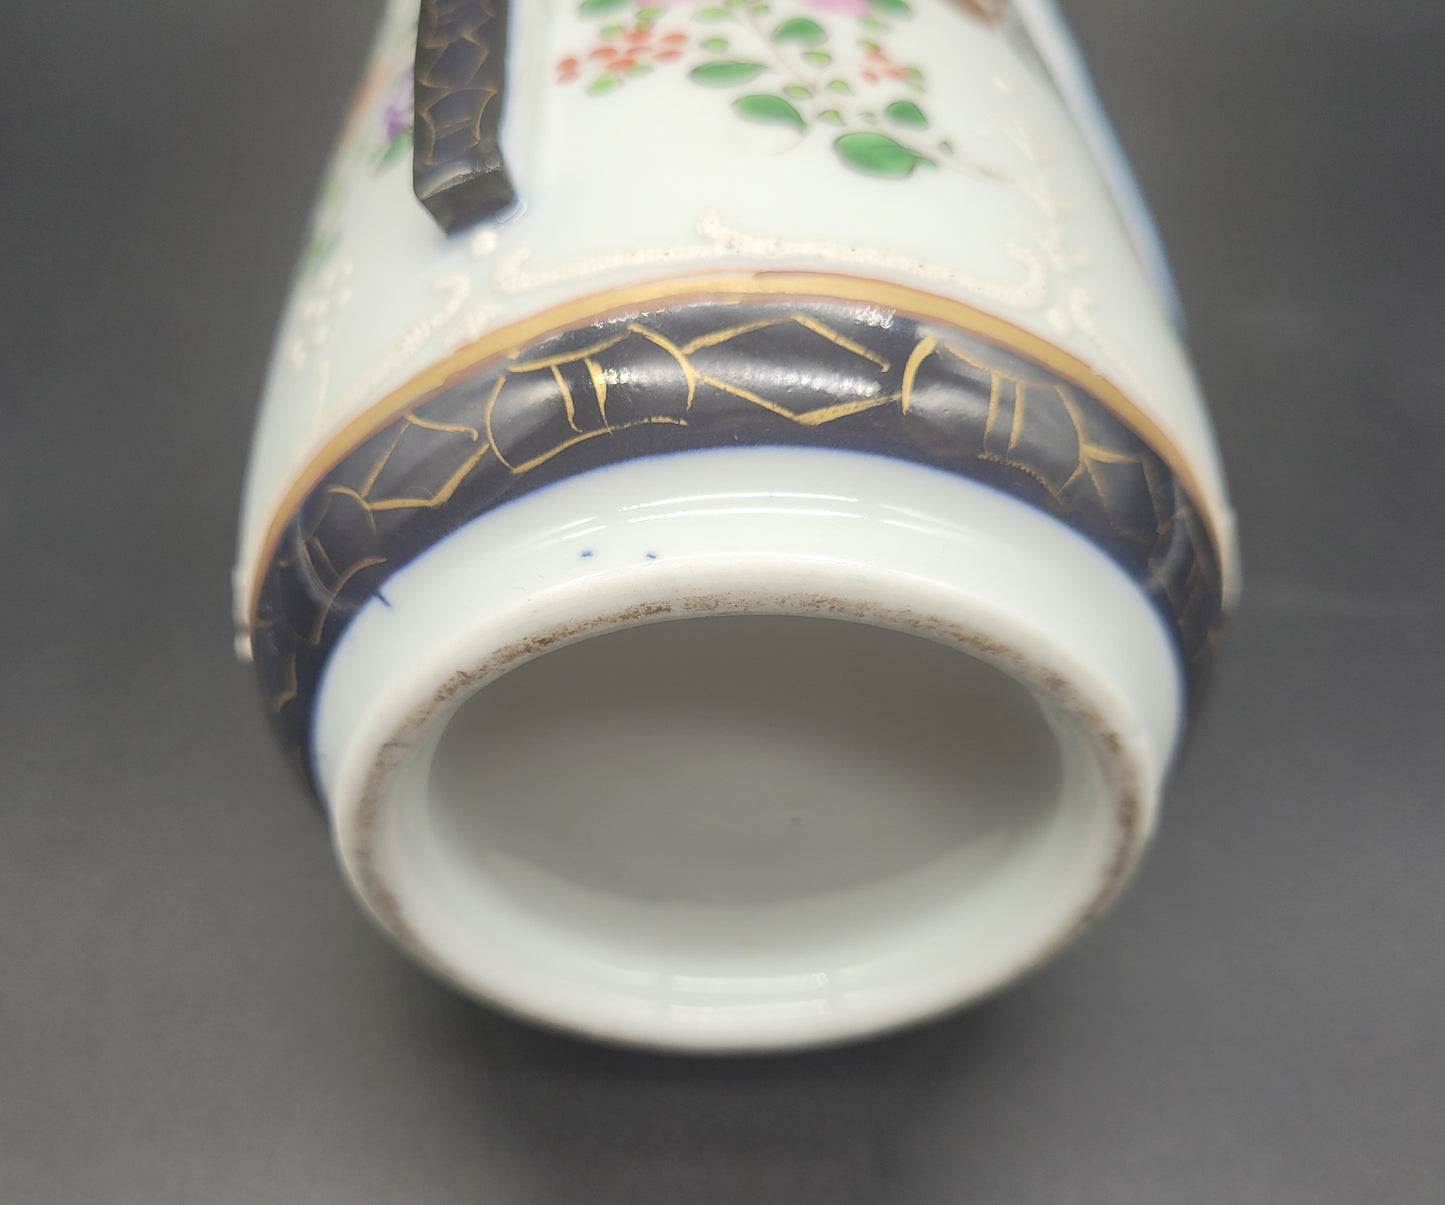 Chinese Porcelain Armorial Vase / Chinese Export Style Vase Samson?